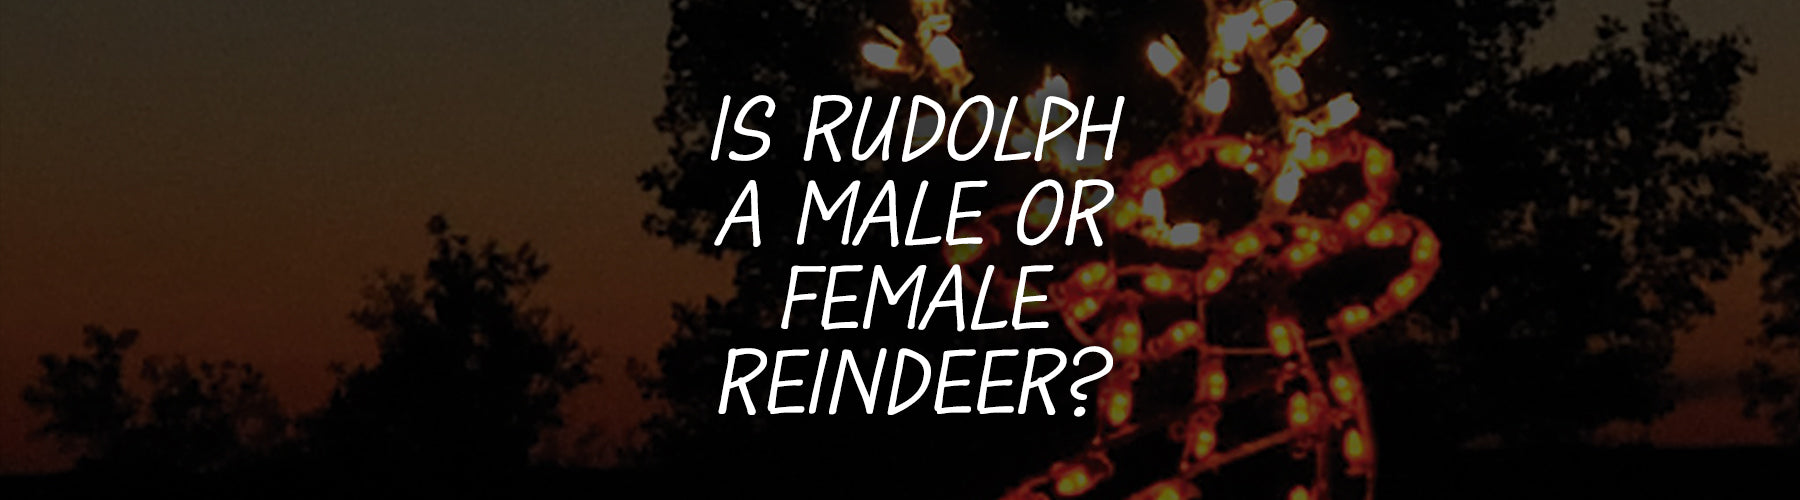 Is Rudolph a Male or Female Reindeer?